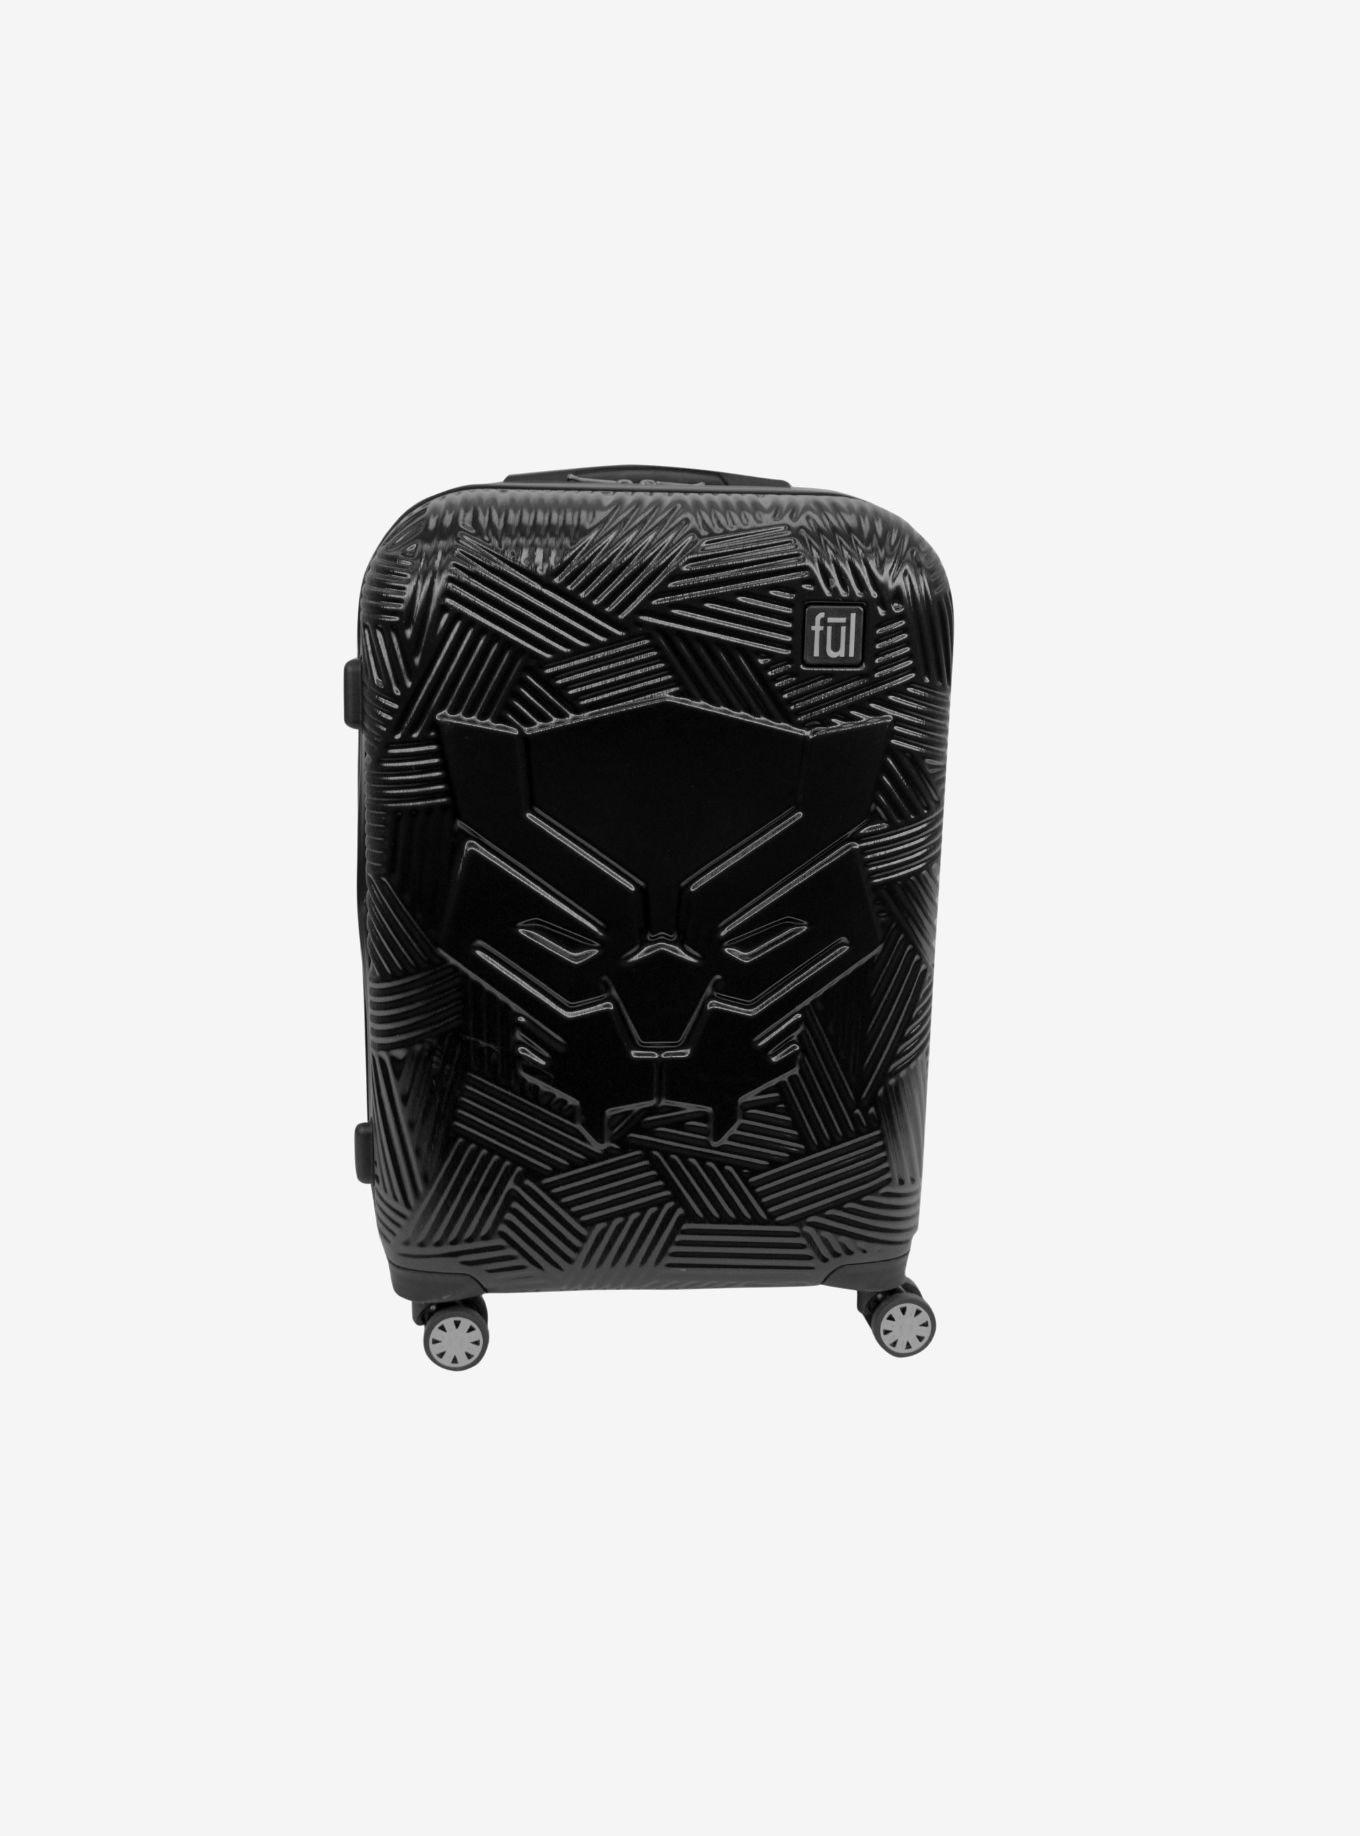 FUL Marvel Black Panther Icon Molded Hard Sided 21 Inch Rolling Luggage, , hi-res